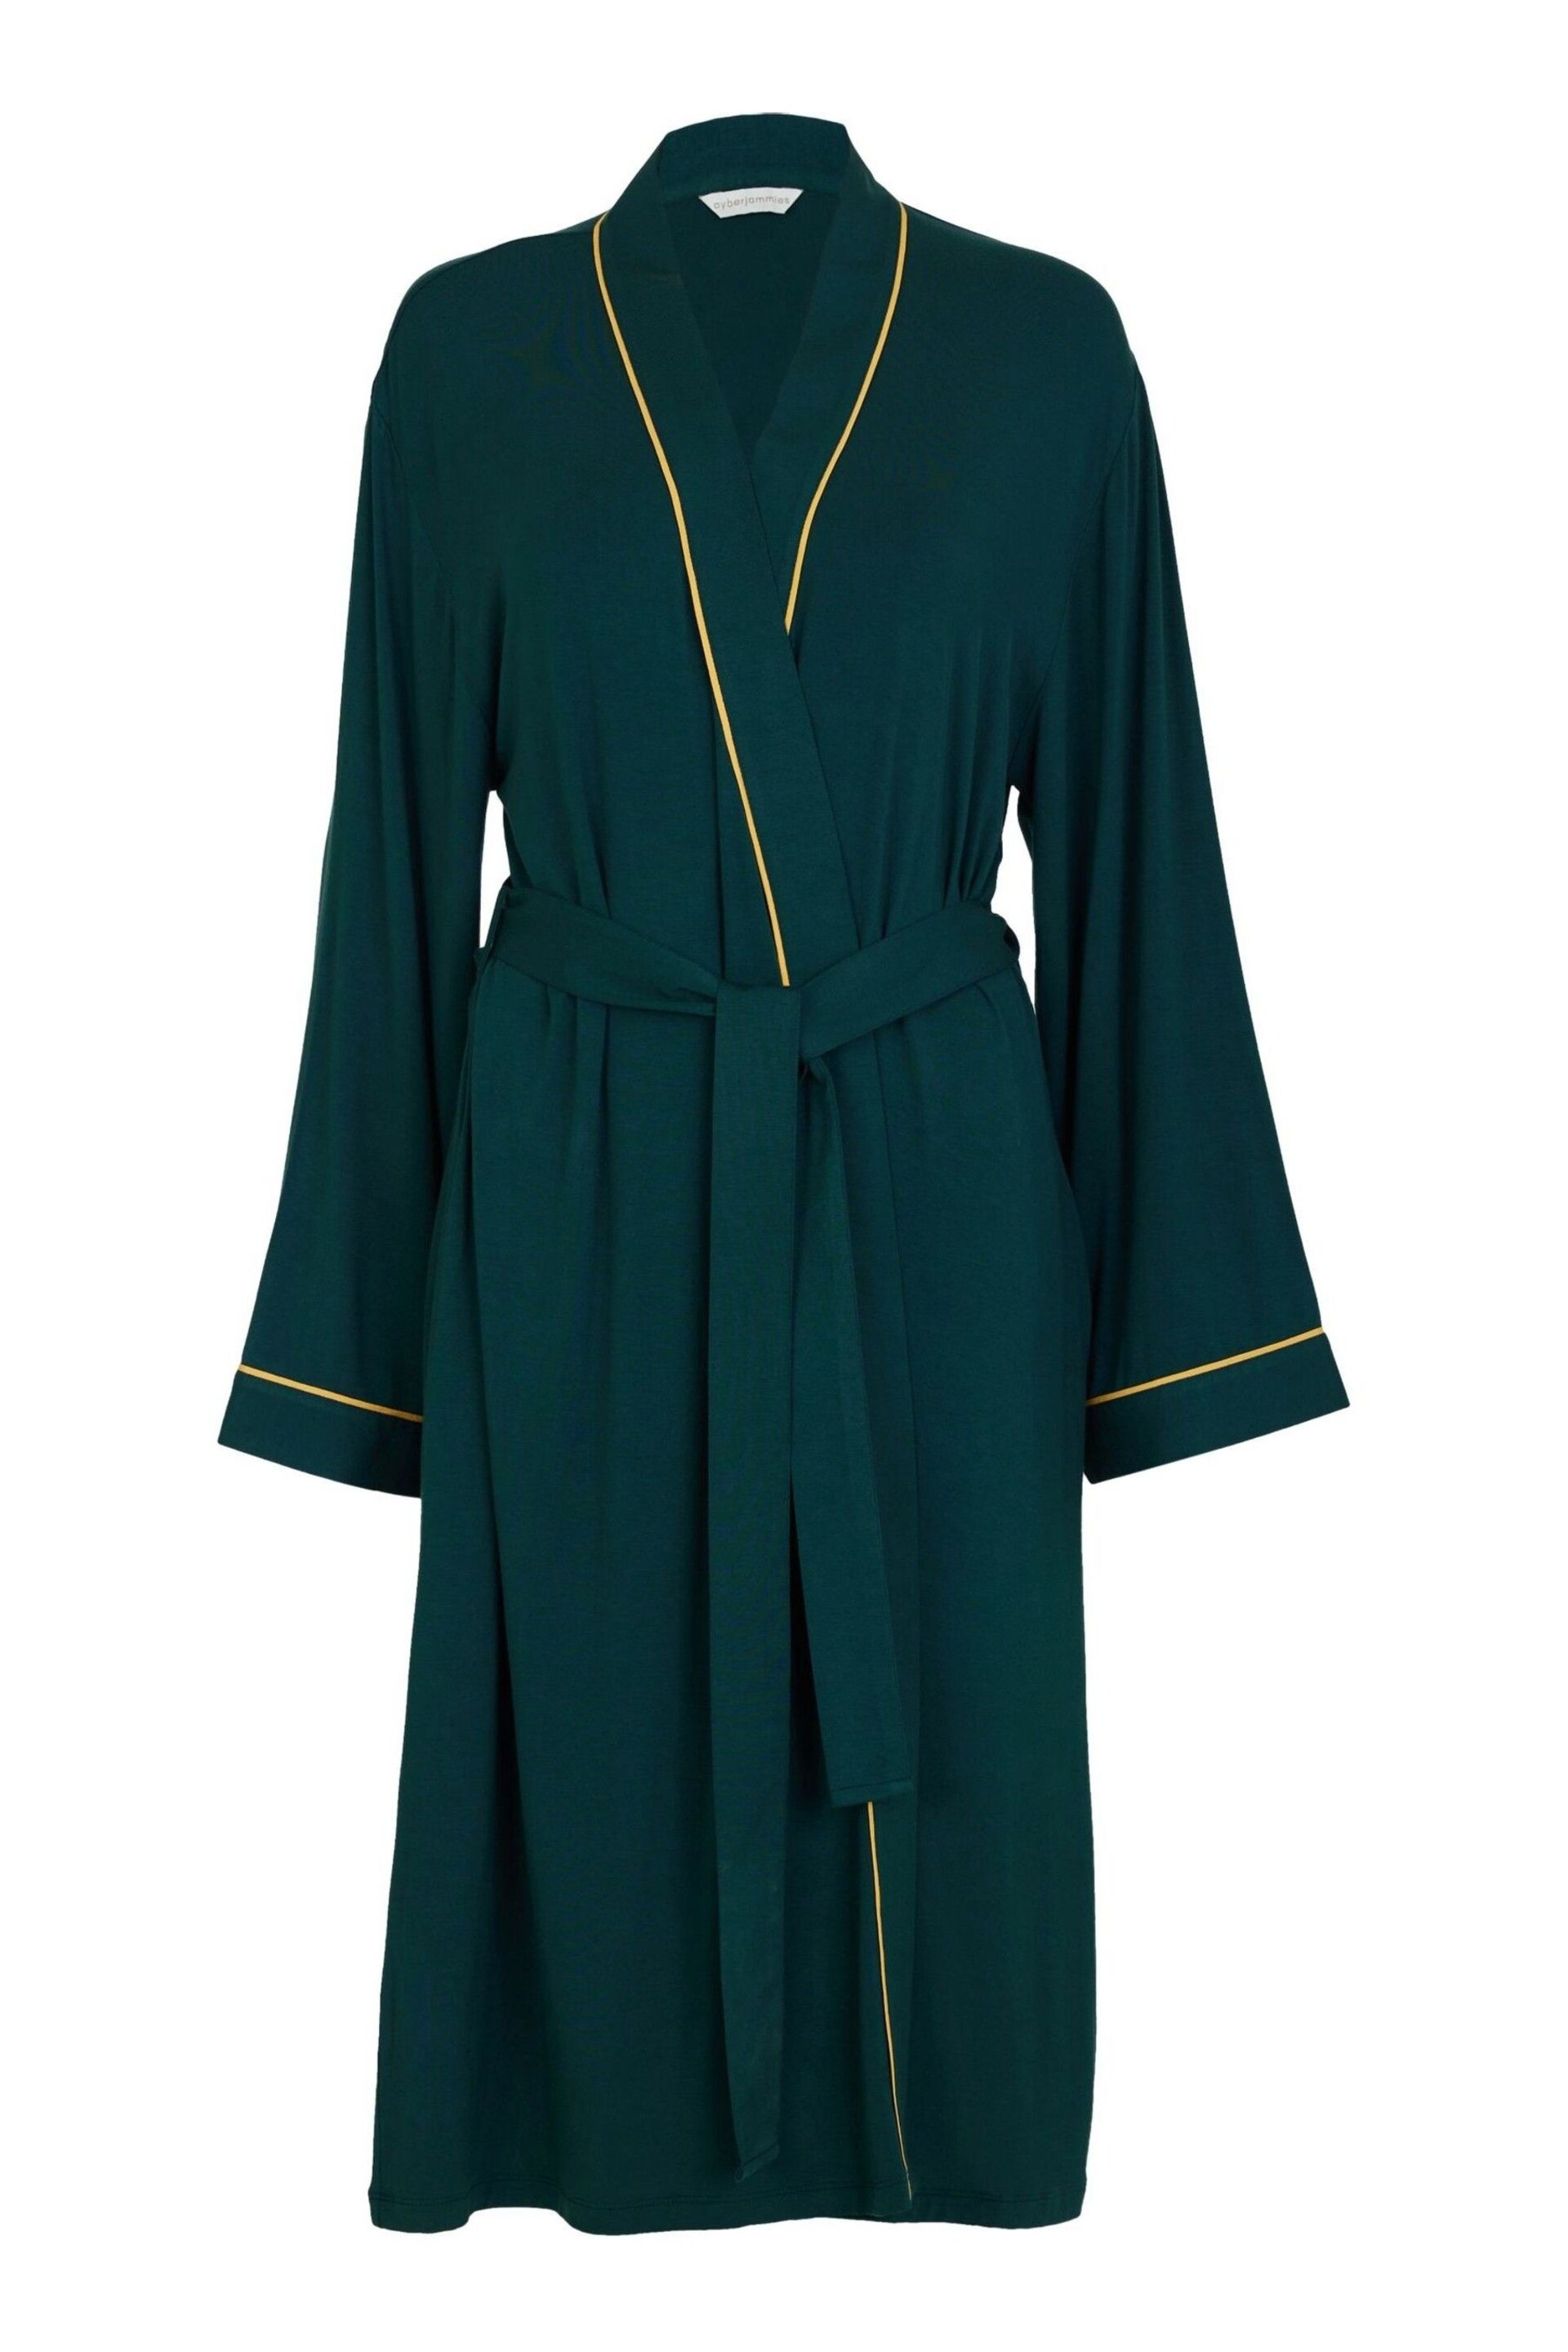 Cyberjammies Green Jersey Short Dressing Gown - Image 4 of 4